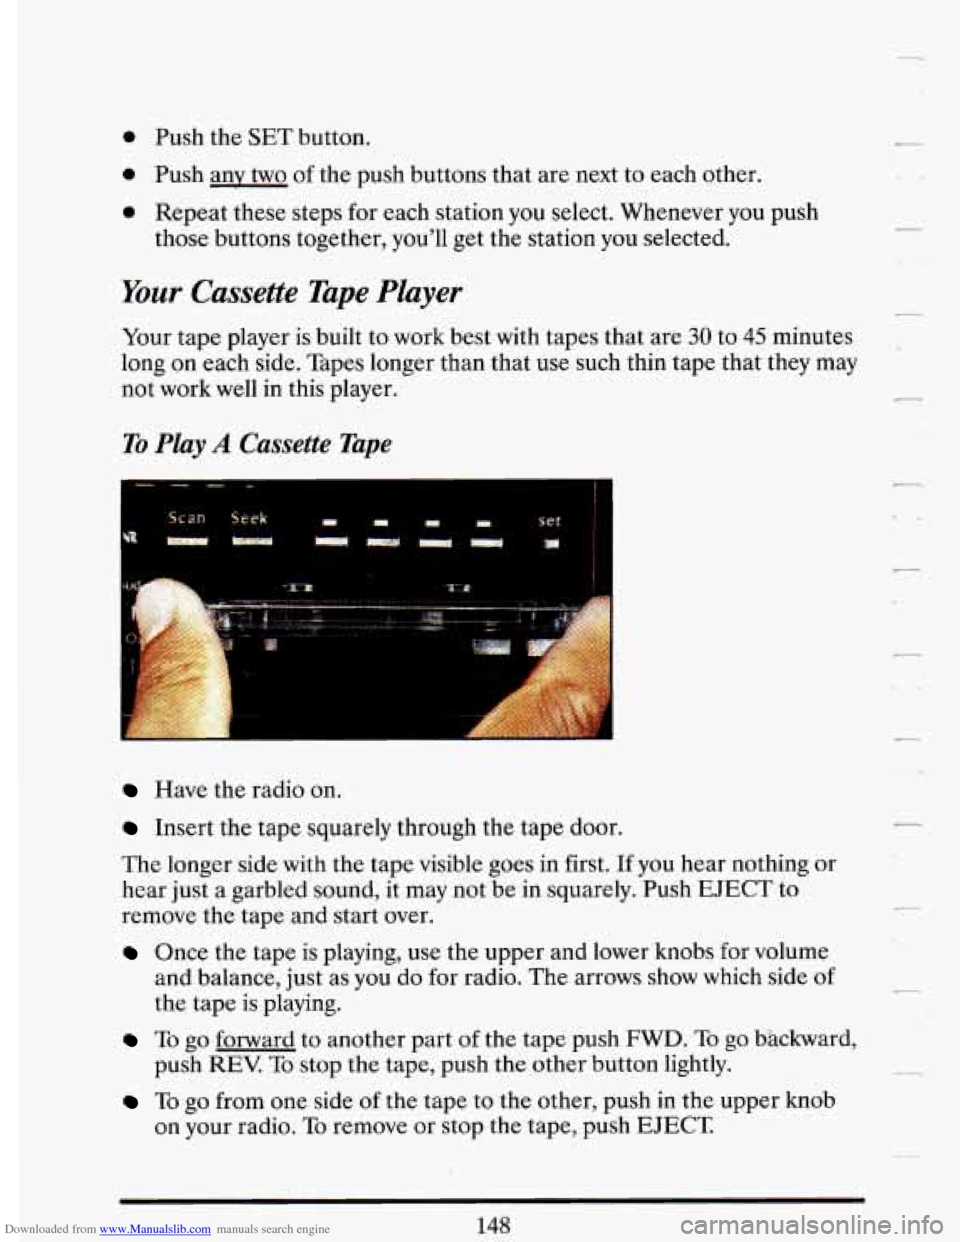 CADILLAC DEVILLE 1993 7.G Owners Manual Downloaded from www.Manualslib.com manuals search engine 0 Push the SET button. 
0 Push any two of the push  buttons  that  are next  to each  other. 
0 Repeat  these  steps  for  each station  you se